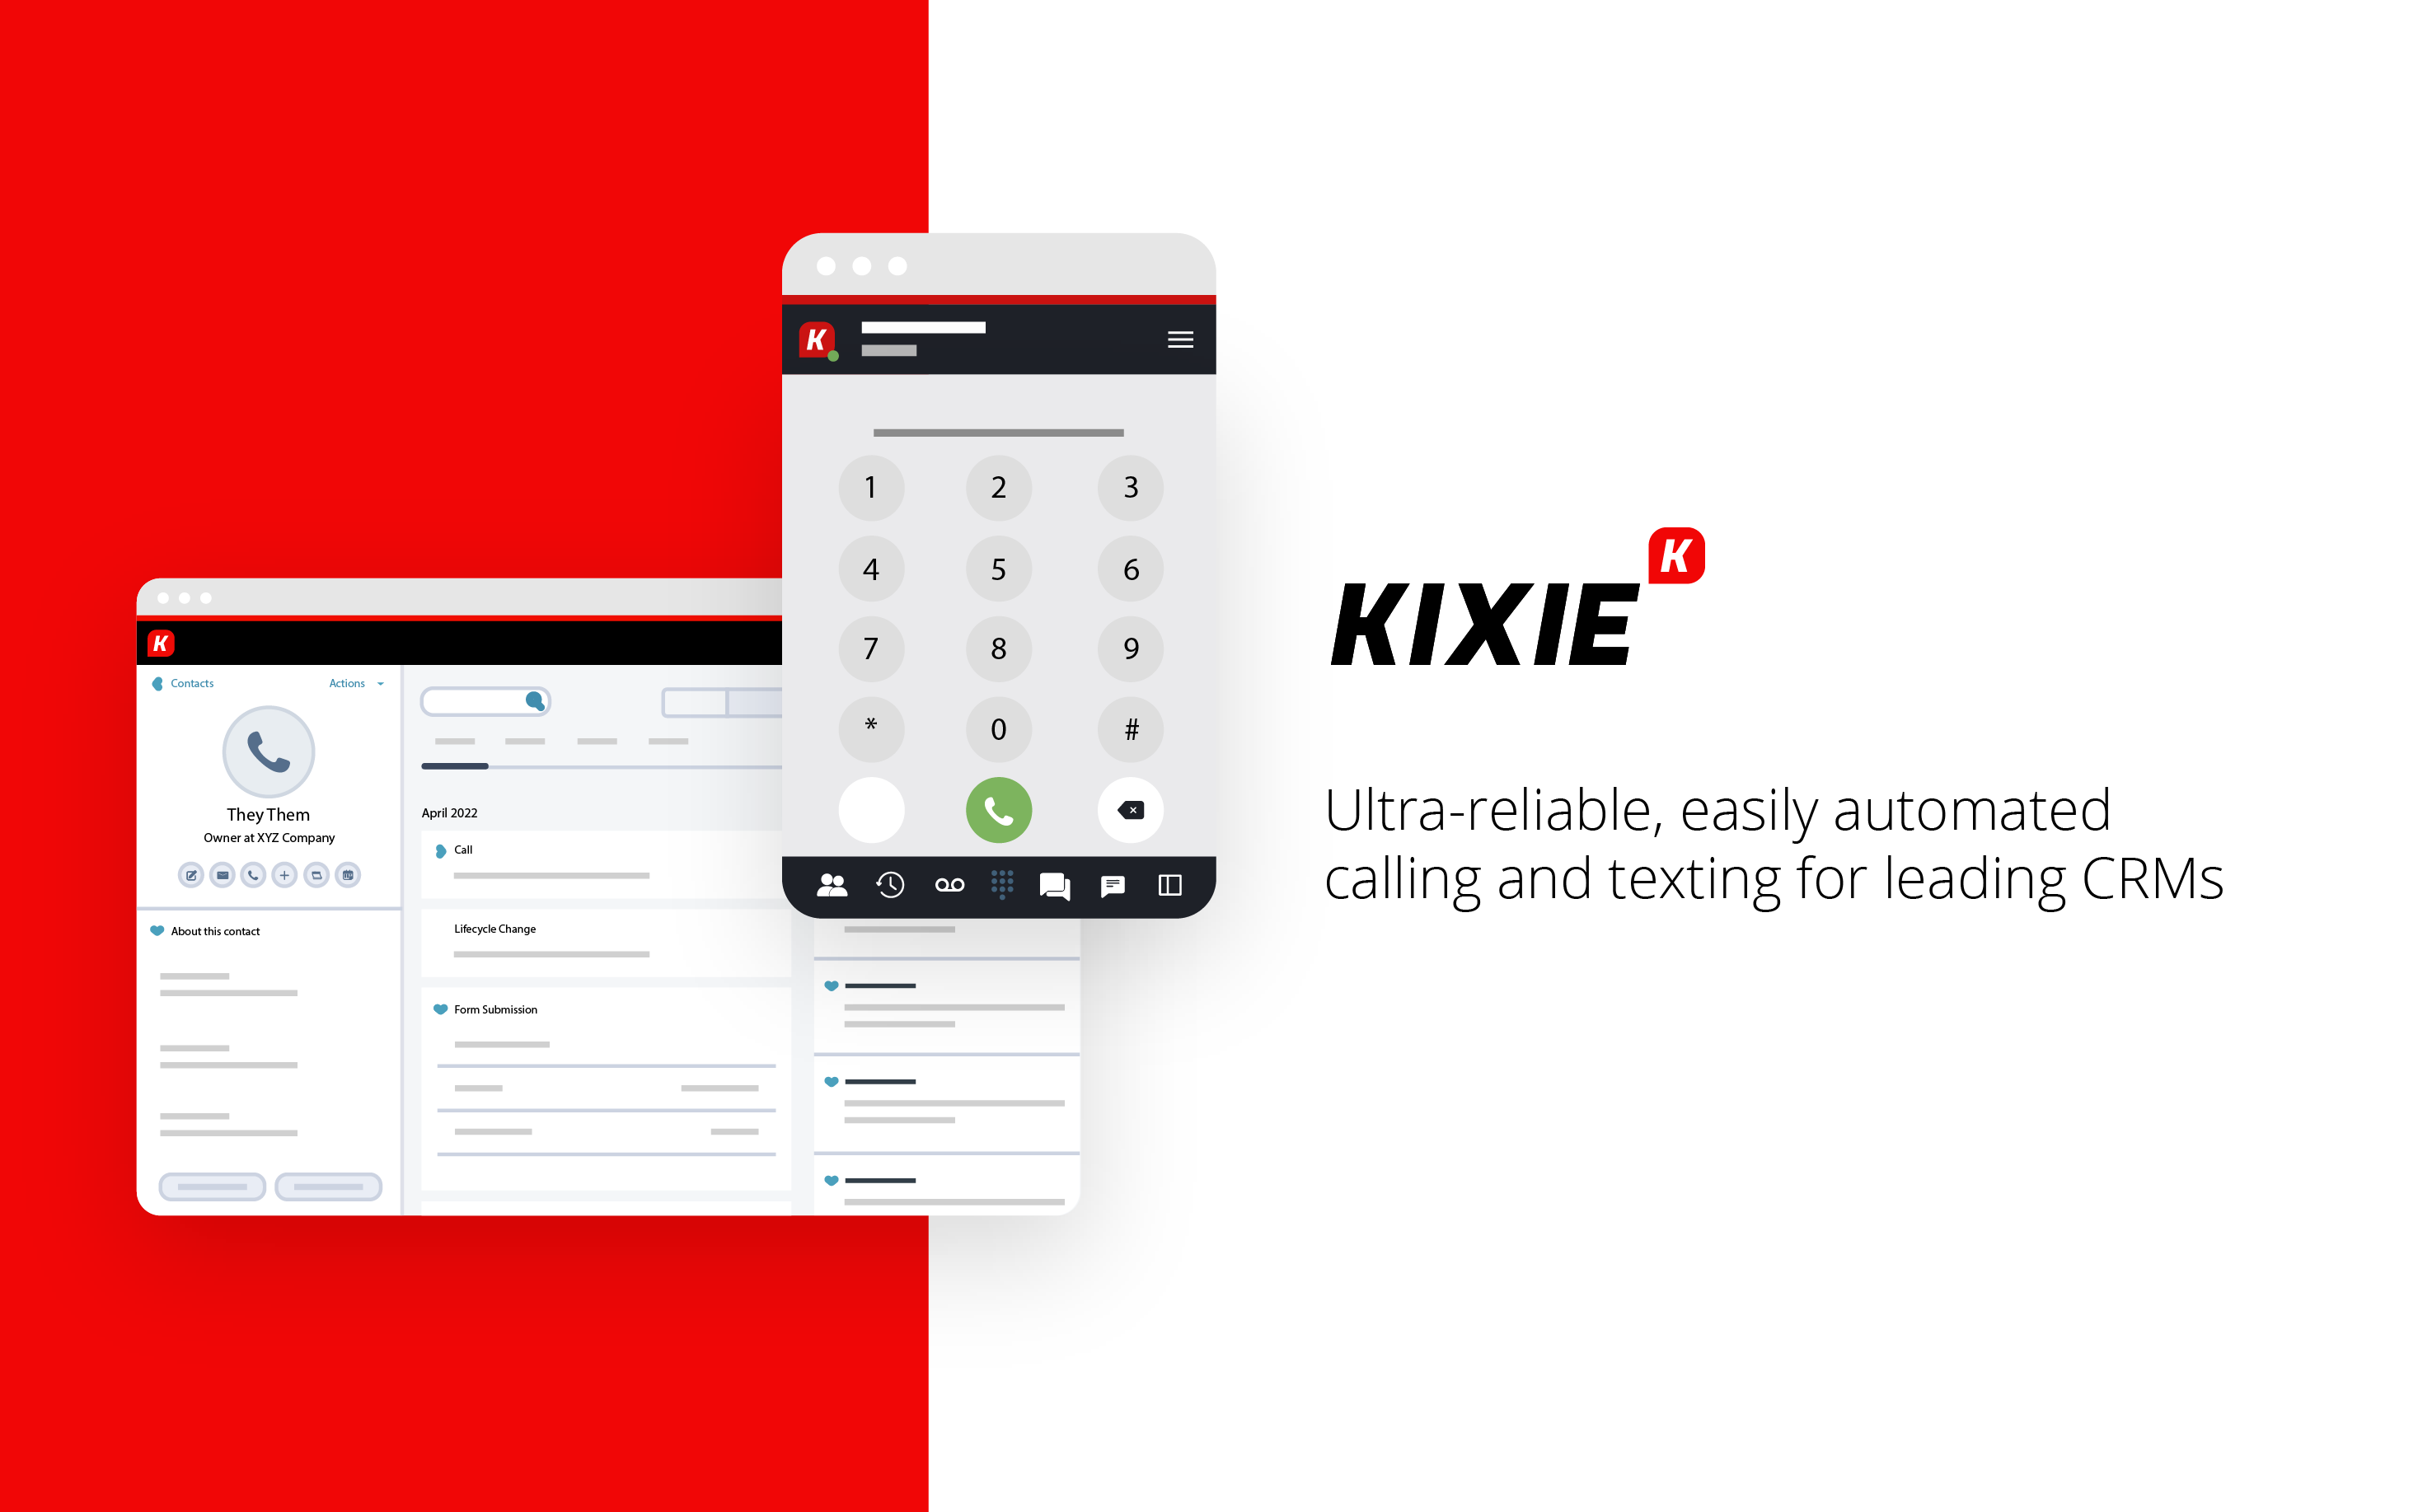 Ultra-reliable calling and texting for all leading CRM.